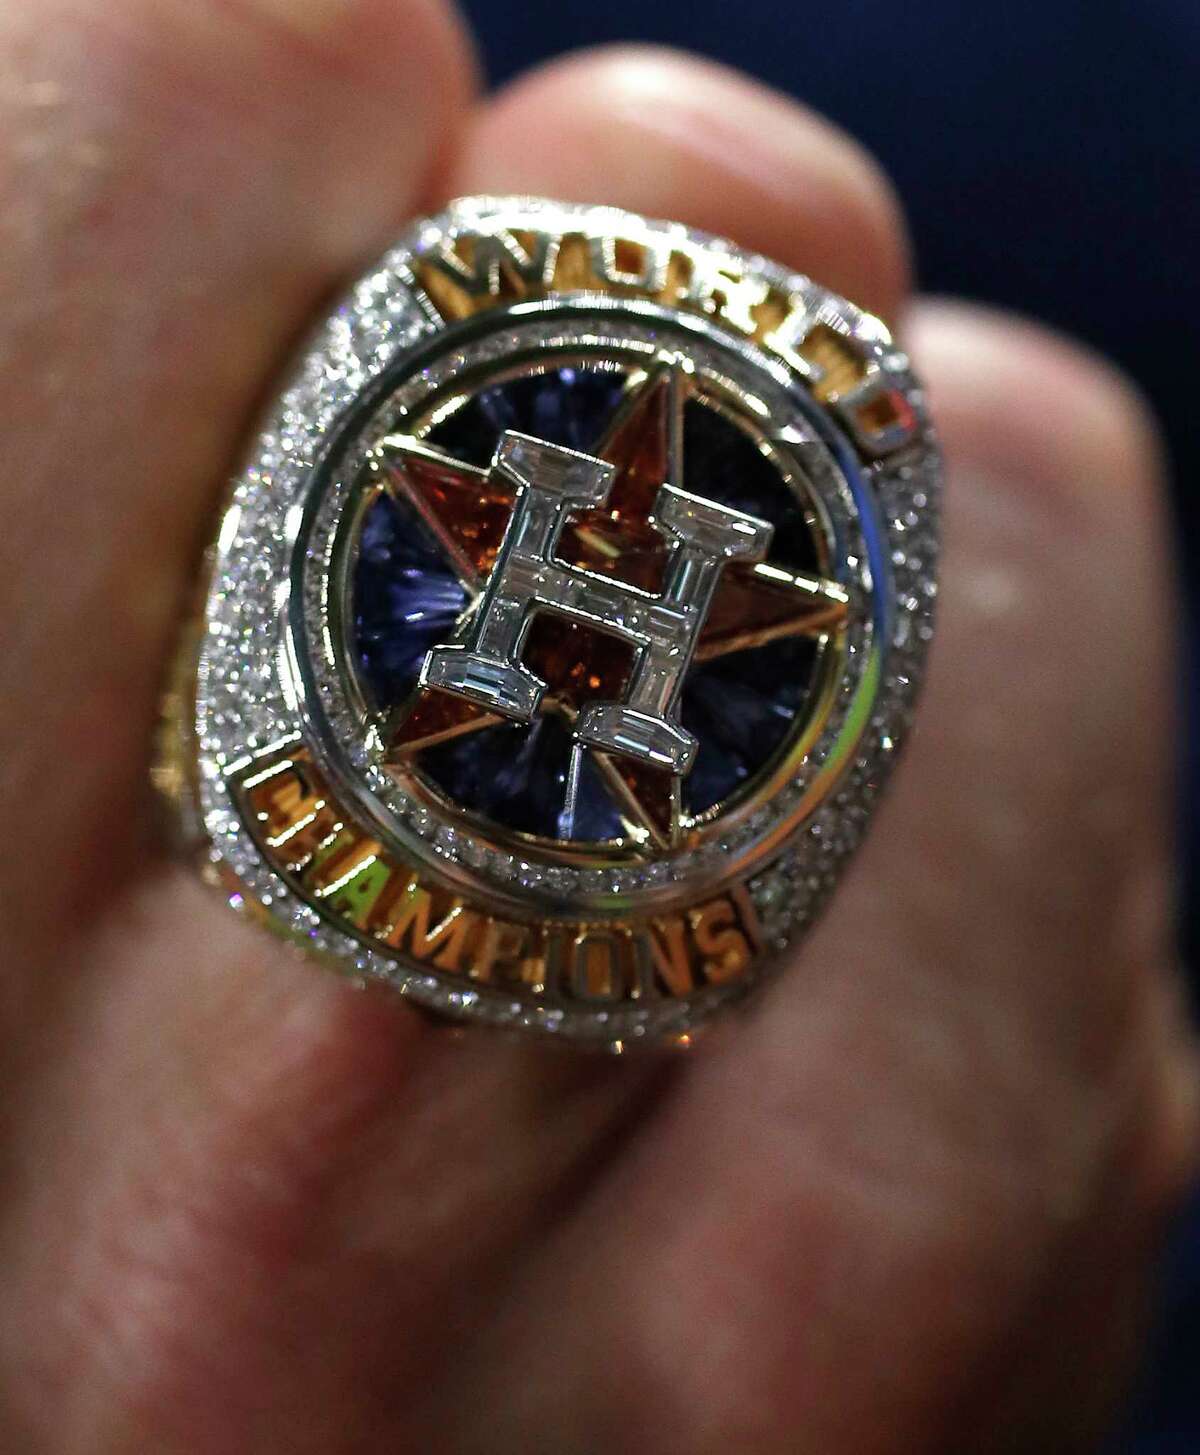 Astros World Series rings ceremony